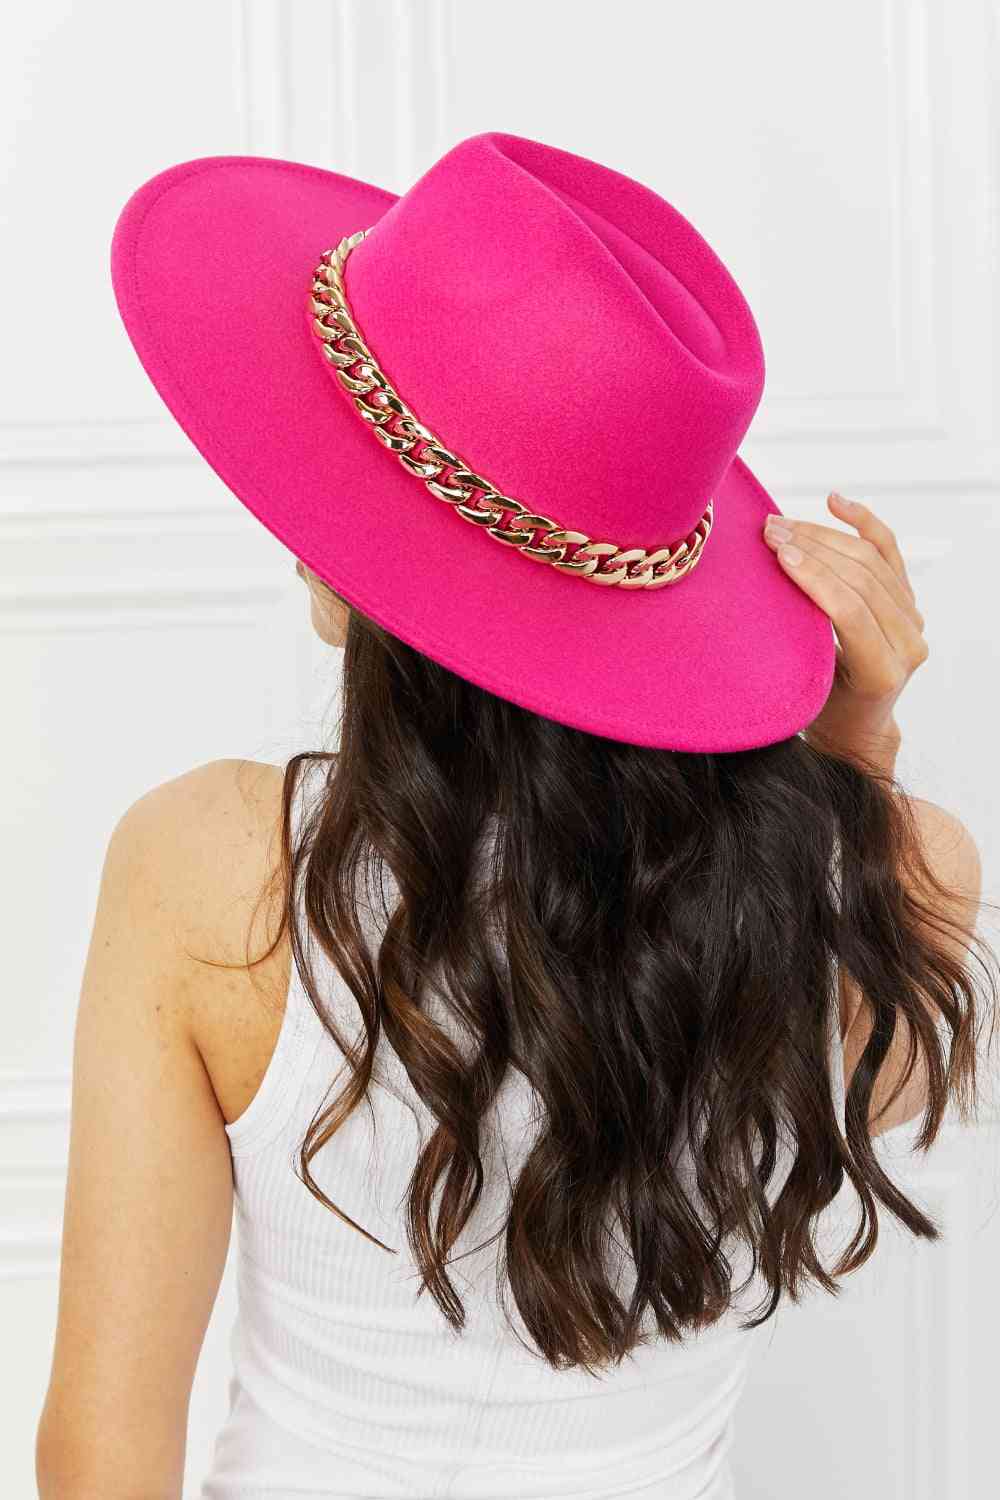 In a vibrant shade of fuchsia, this Fedora hat from Trendsi Trends brings an exquisite pop of color to any understated outfit. The refined design features dainty chain accents and adjustable straps for a flawless fit. Add a touch of opulence to your look with this chic and fashionable accessory.